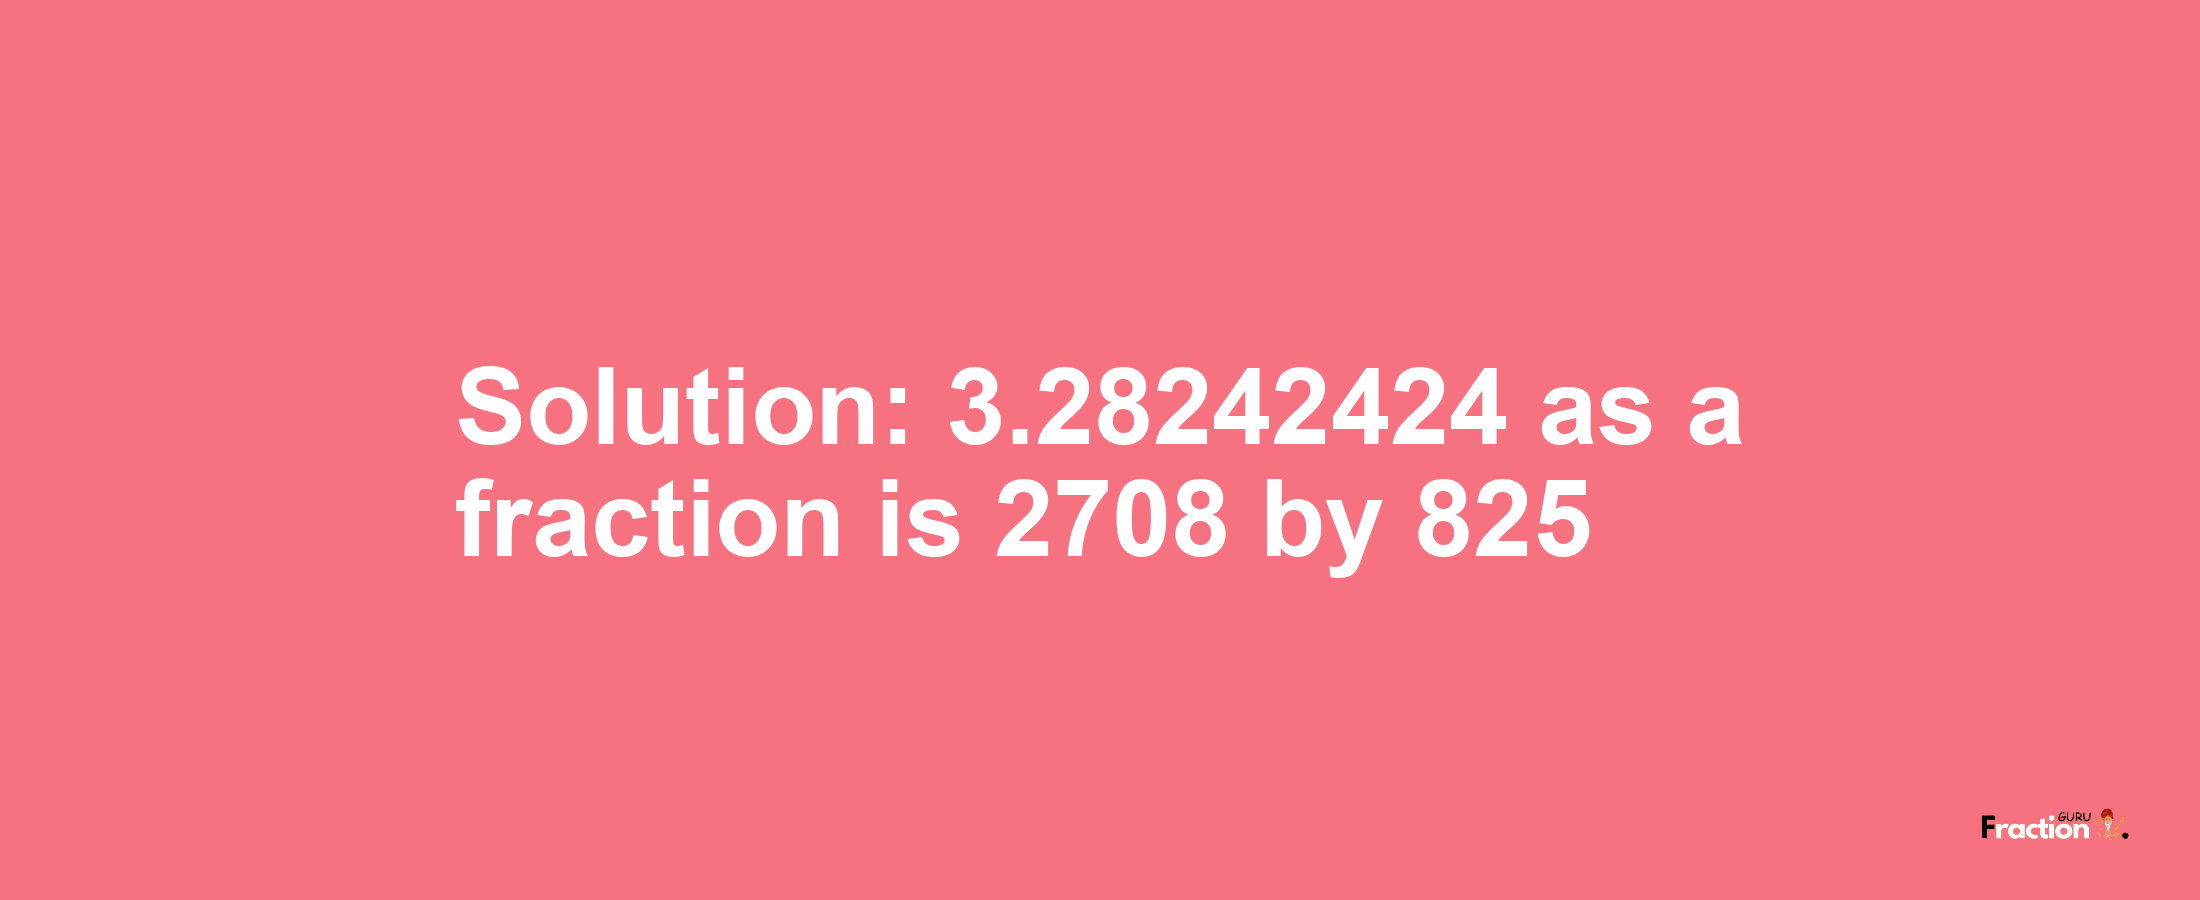 Solution:3.28242424 as a fraction is 2708/825